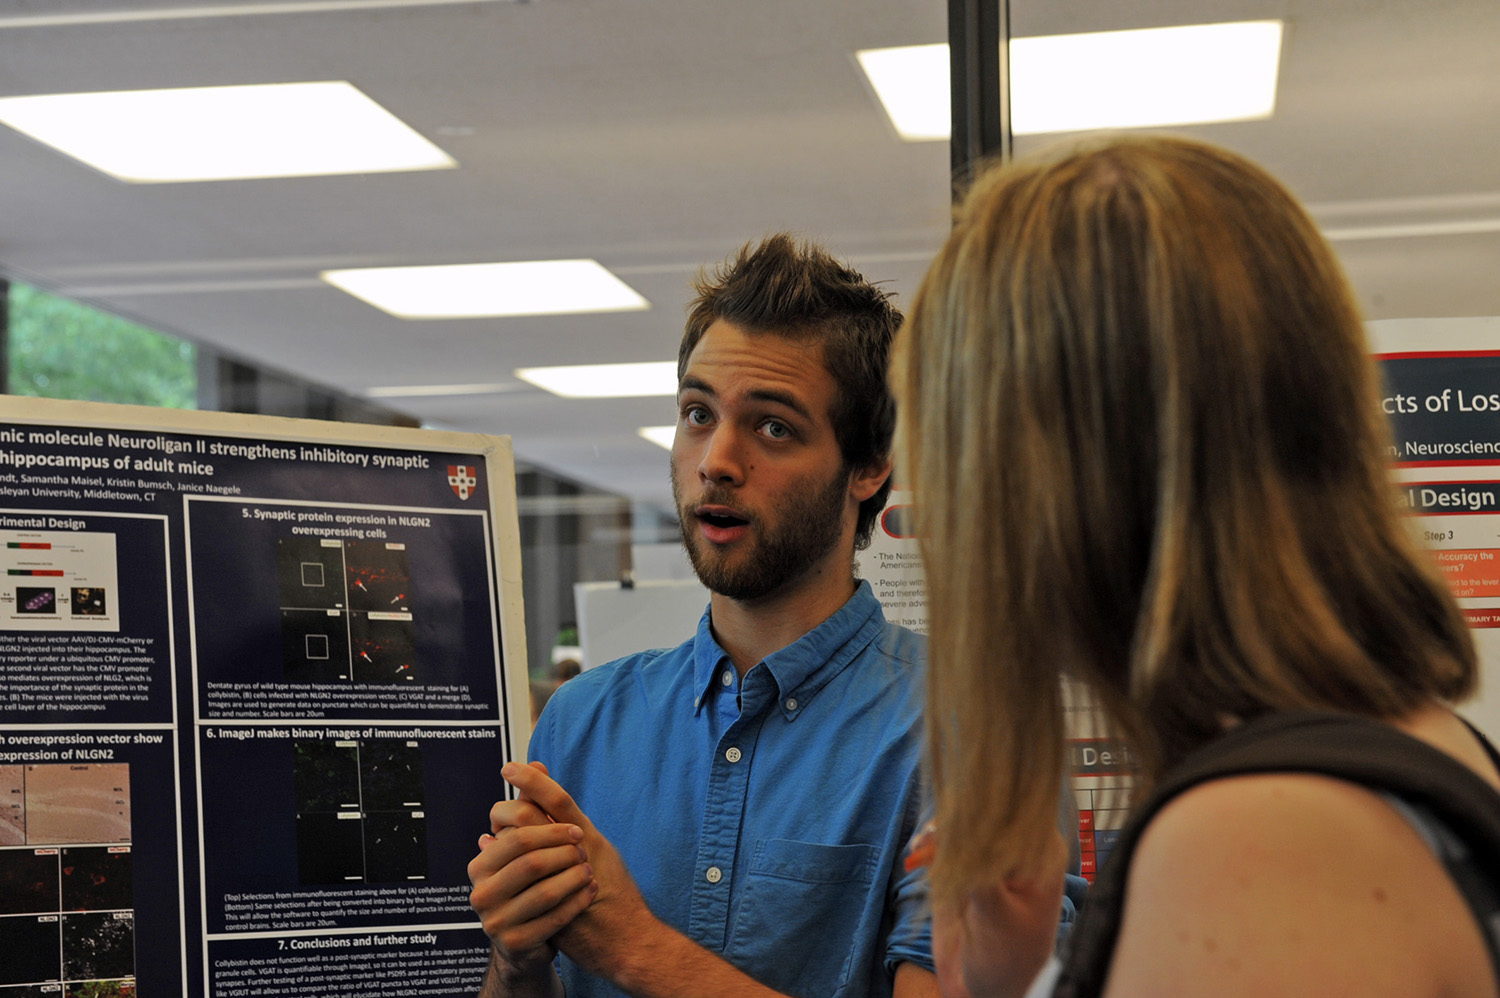 A poster titled "Immunohistochemical Analysis of Status Epilepticus Mice Treated with Striatal-Enriched Tyrosine Phosphatase Inhibitor" was presented by Matt Pelton ’17. His advisor is Janice Naegele, professor of biology, professor of neuroscience and behavior.